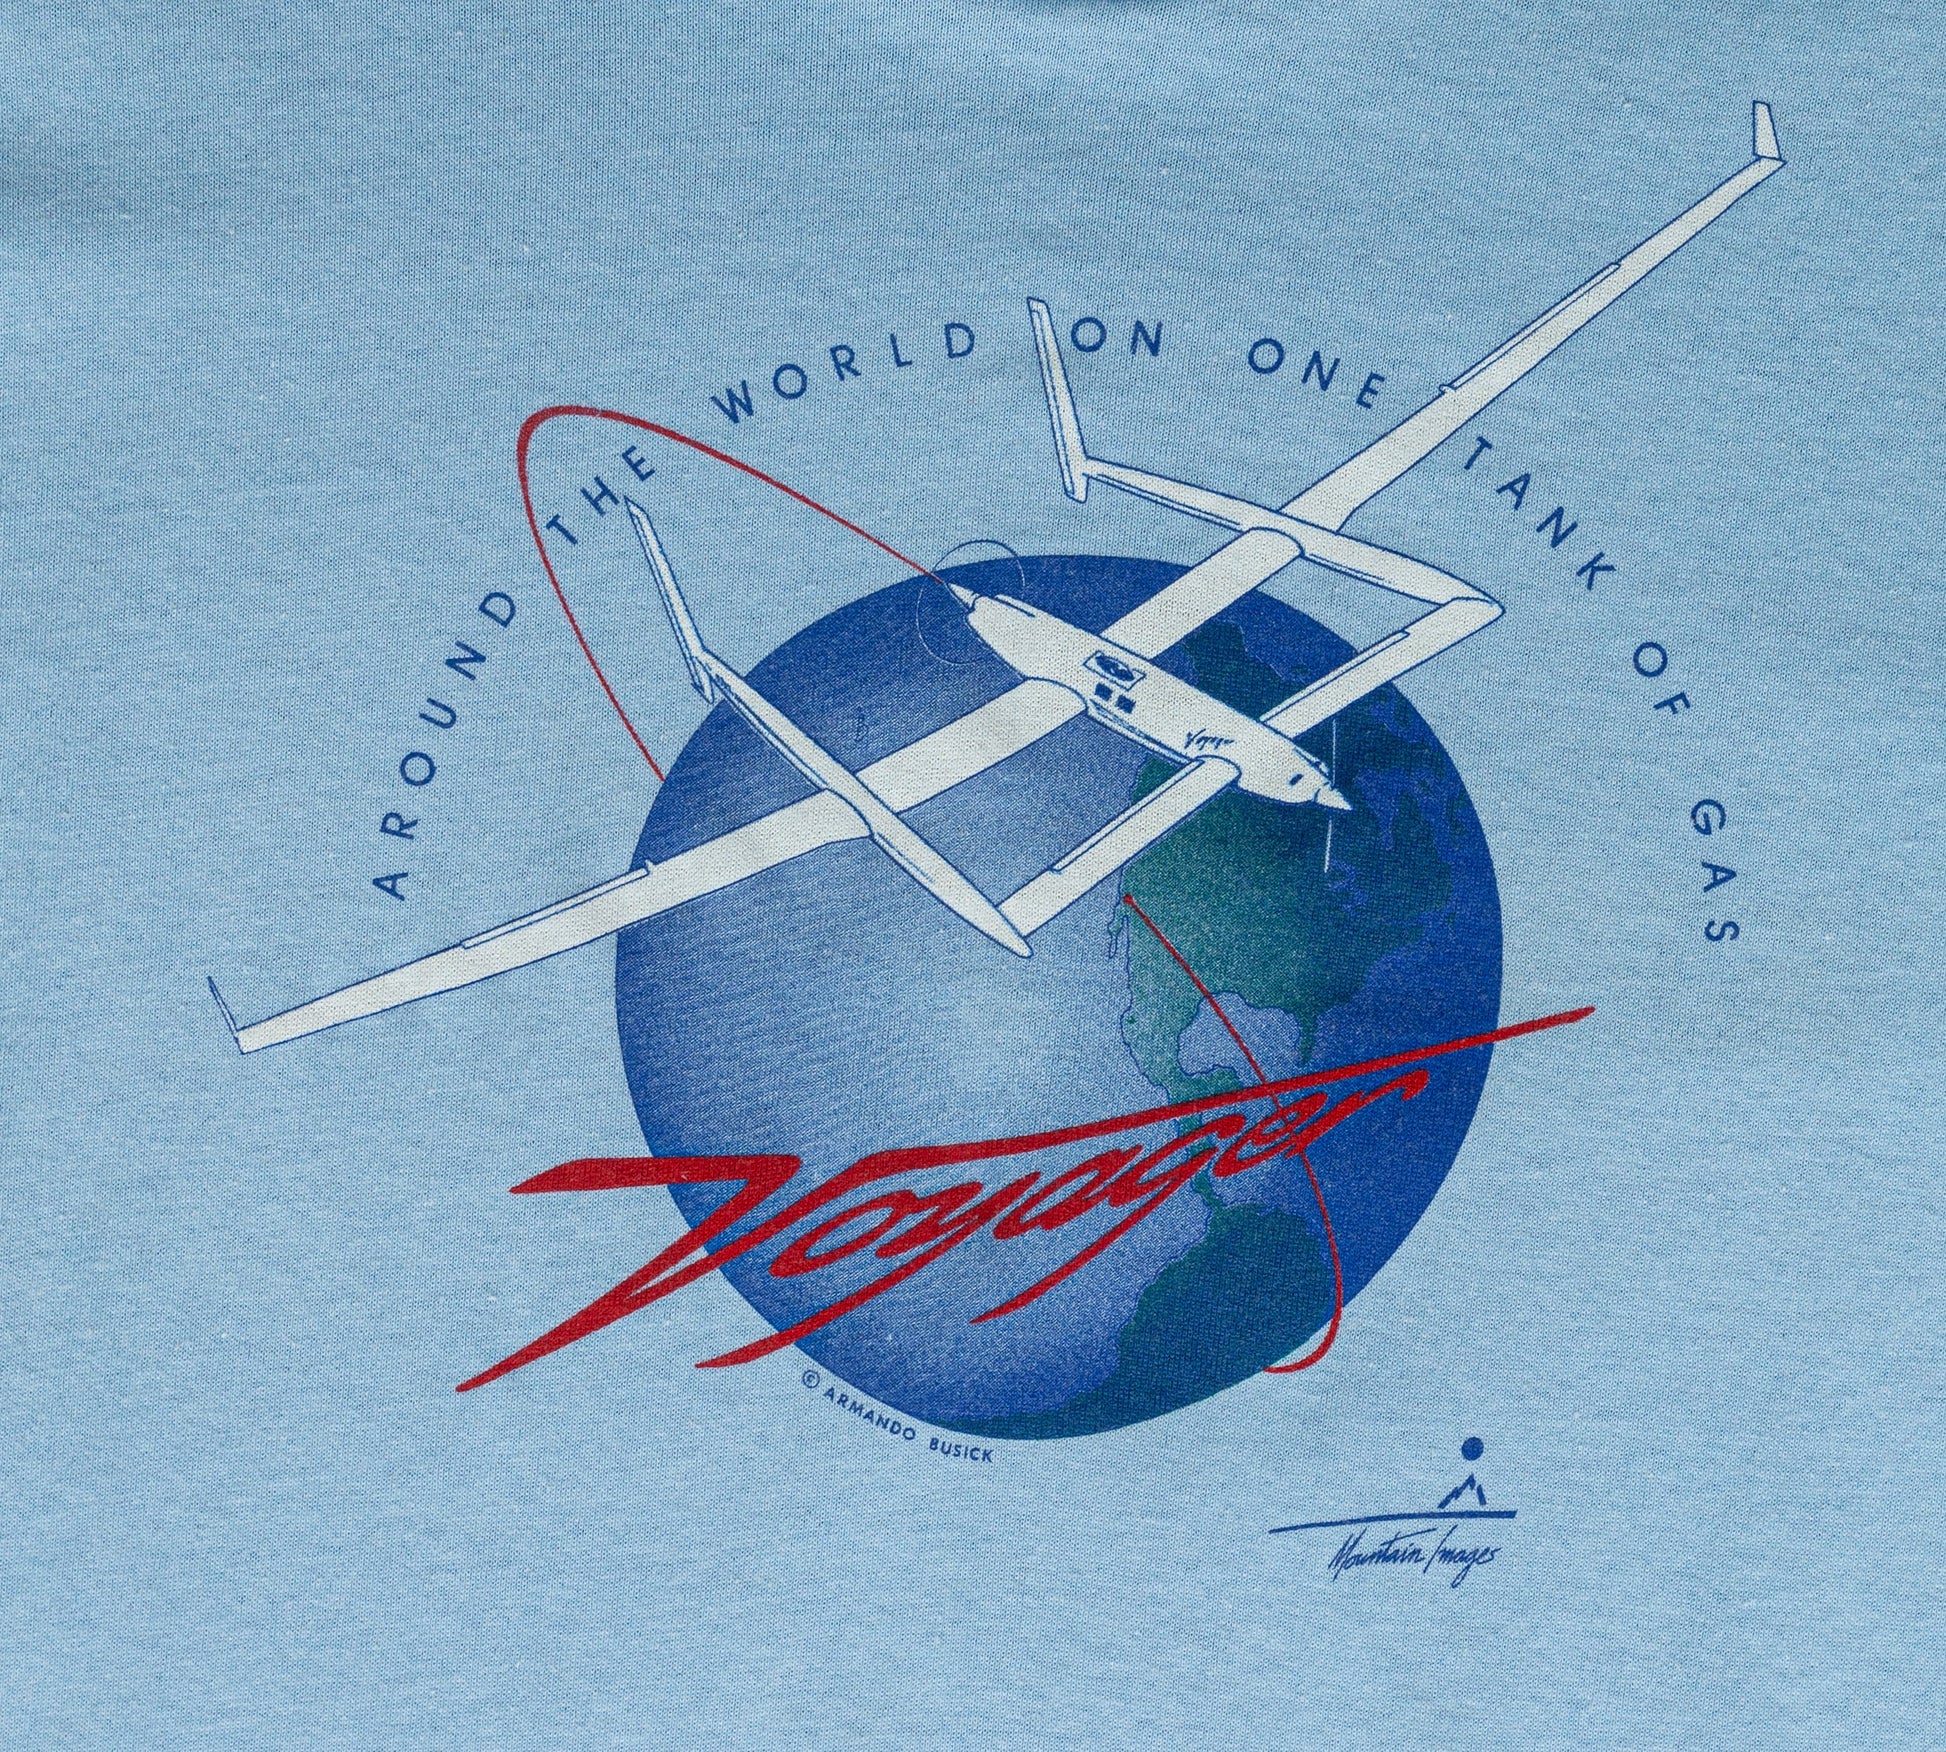 80s Voyager "Around The World On A Tank Of Gas" T Shirt - Medium 